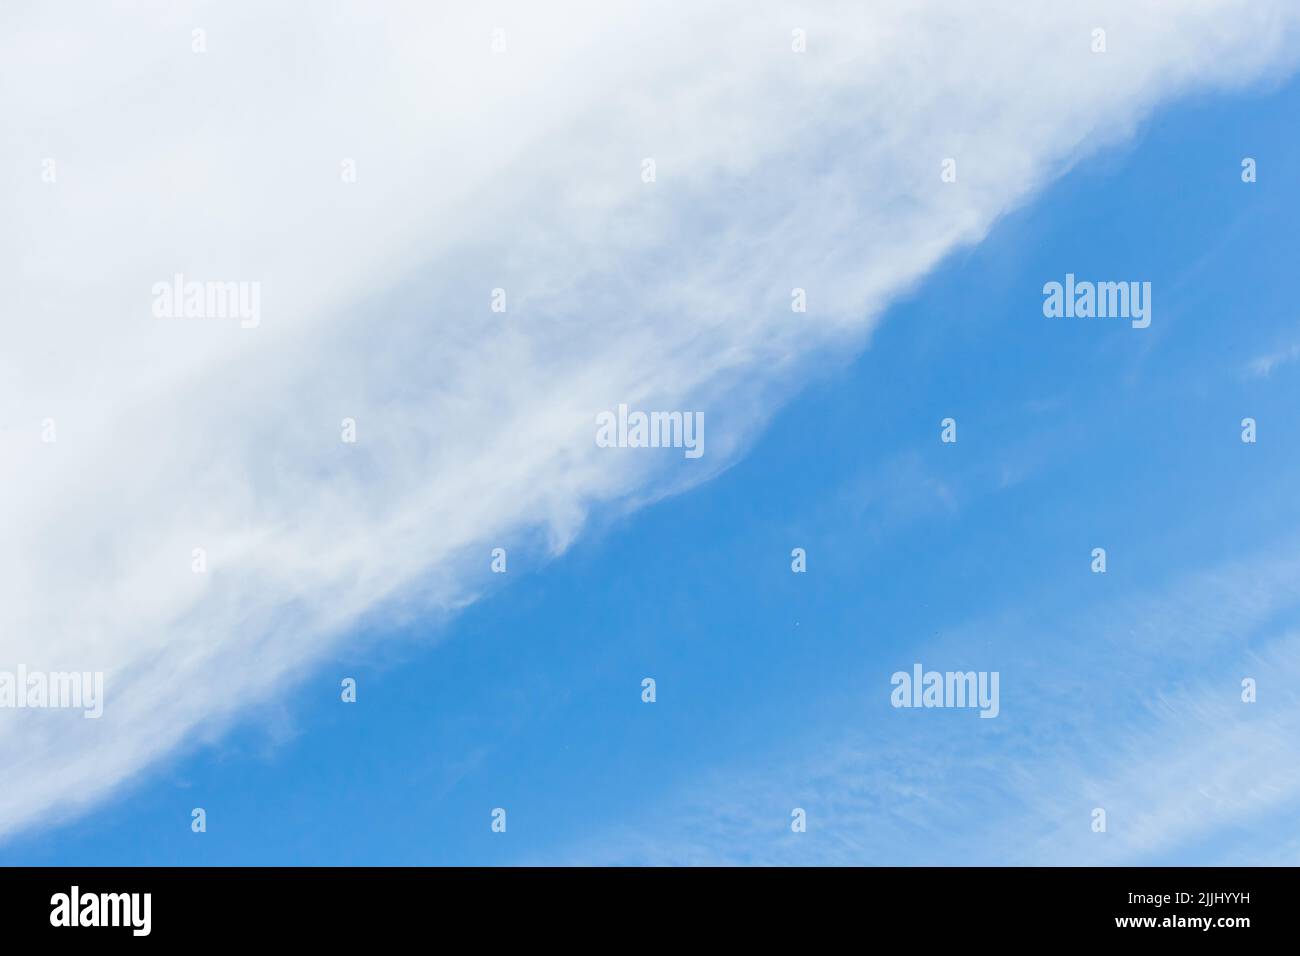 Diagonal line pattern abstract nature of white clouds and blue sky background. Stock Photo